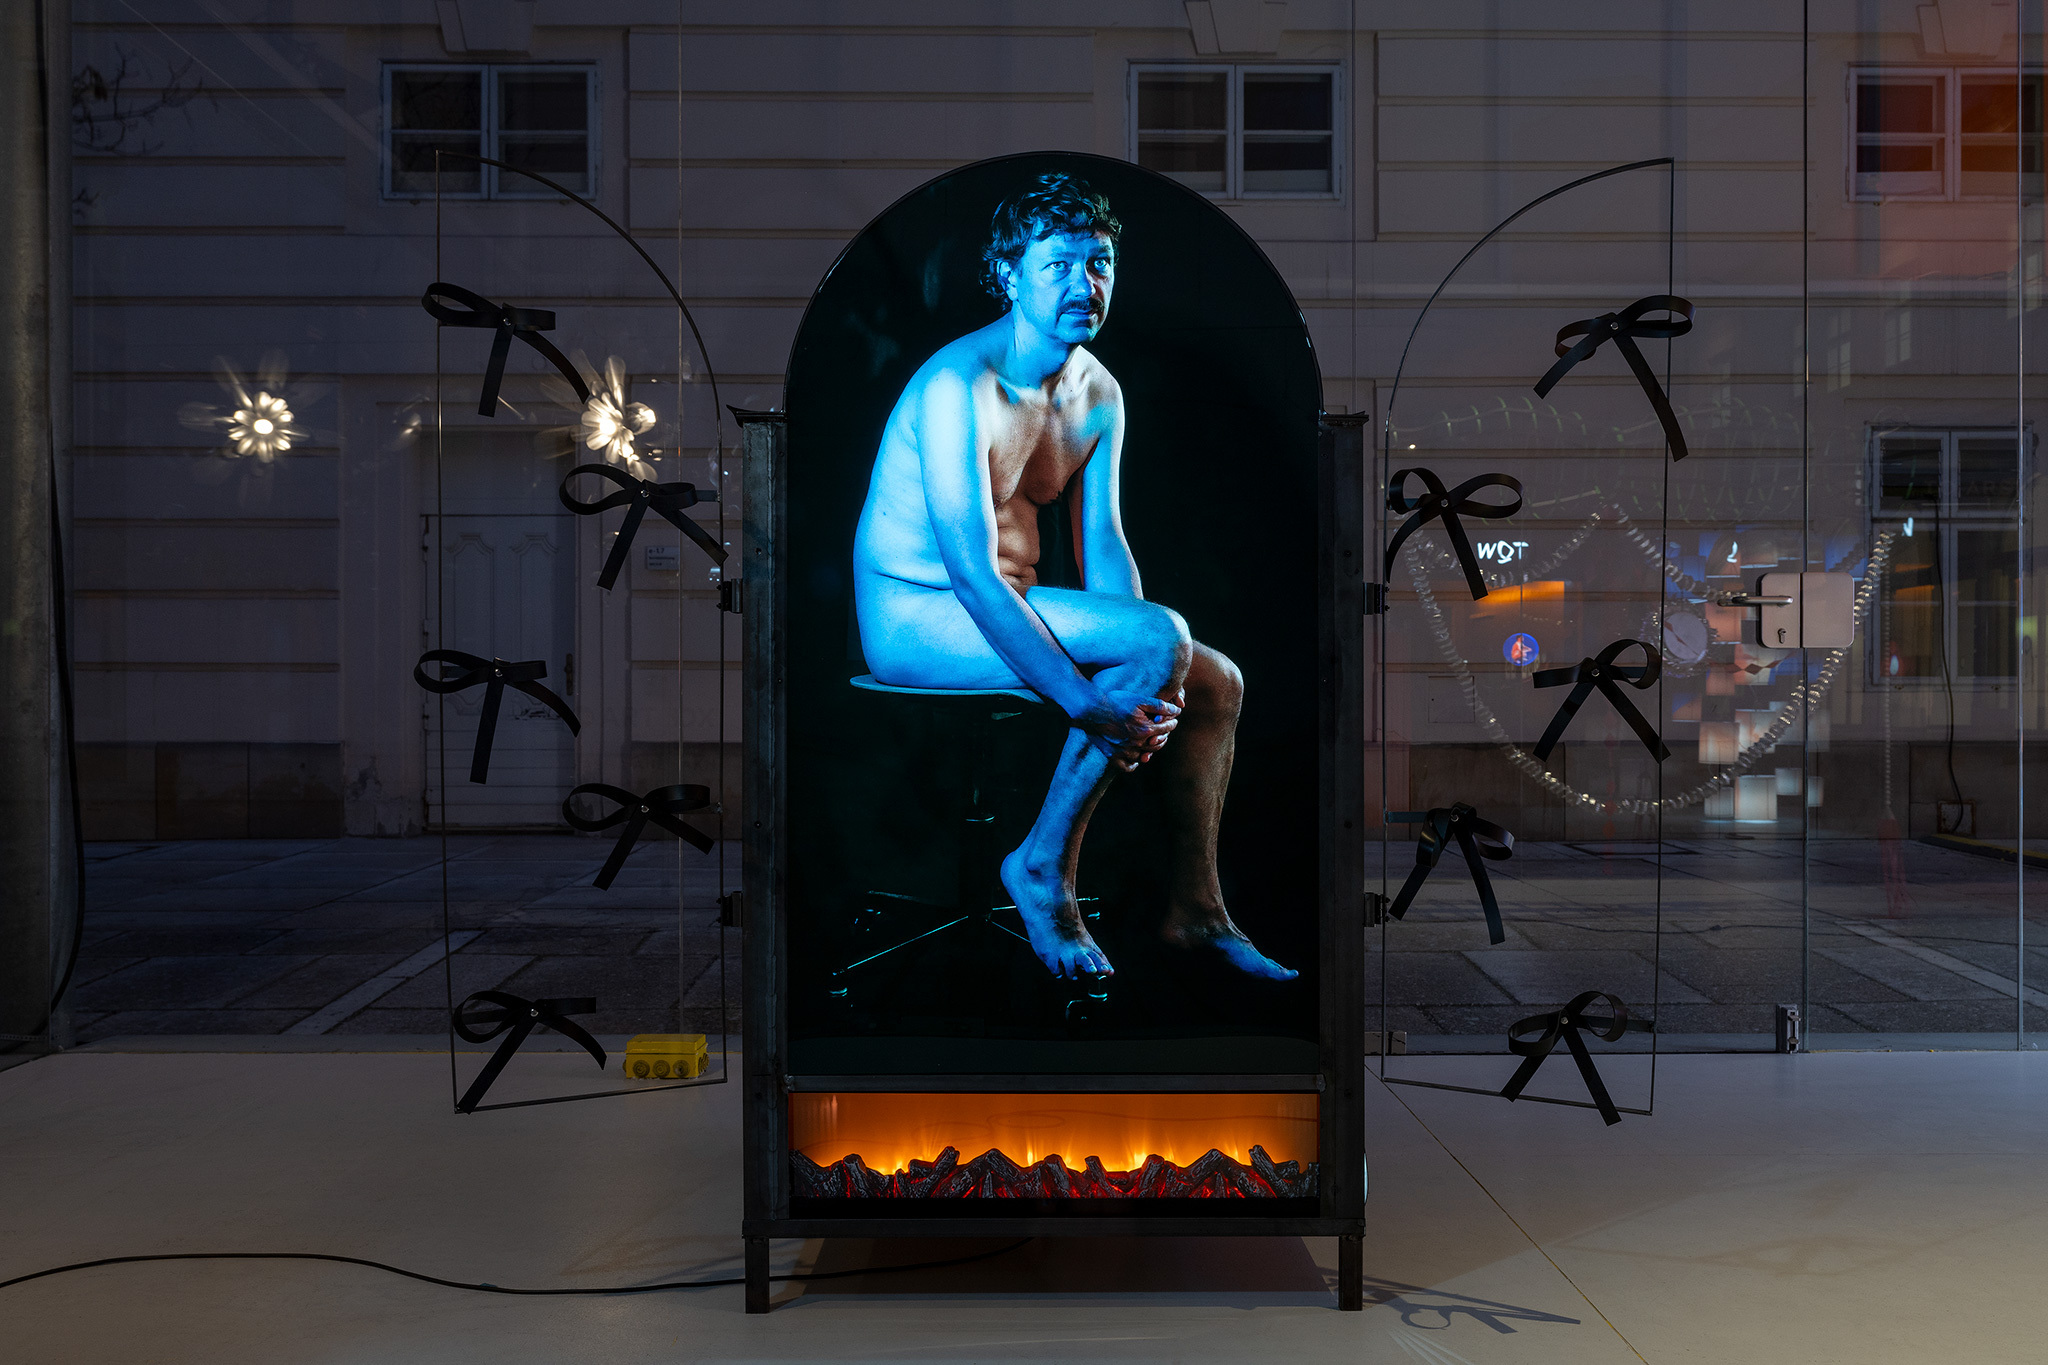 Heti P. 2 (Kamin piece), 2024  Steel, foil laminated on Plexiglas, wood, rubber, LED stripes, industrial aluminum foil, string of lights, electric fireplace, 100 x 154,5 x width variable